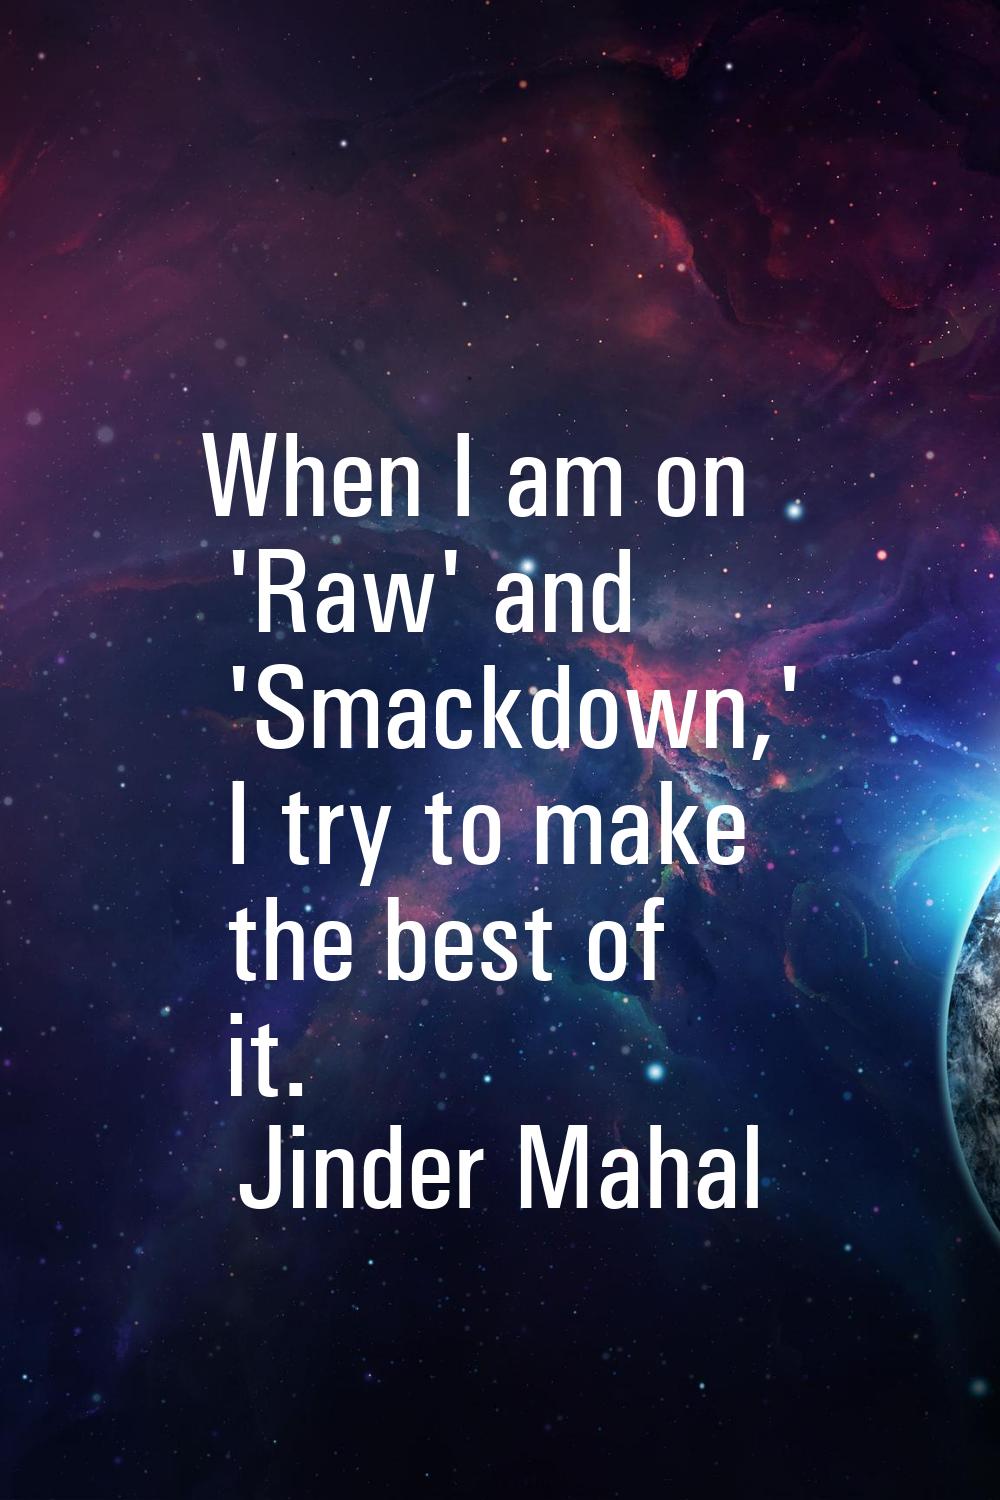 When I am on 'Raw' and 'Smackdown,' I try to make the best of it.